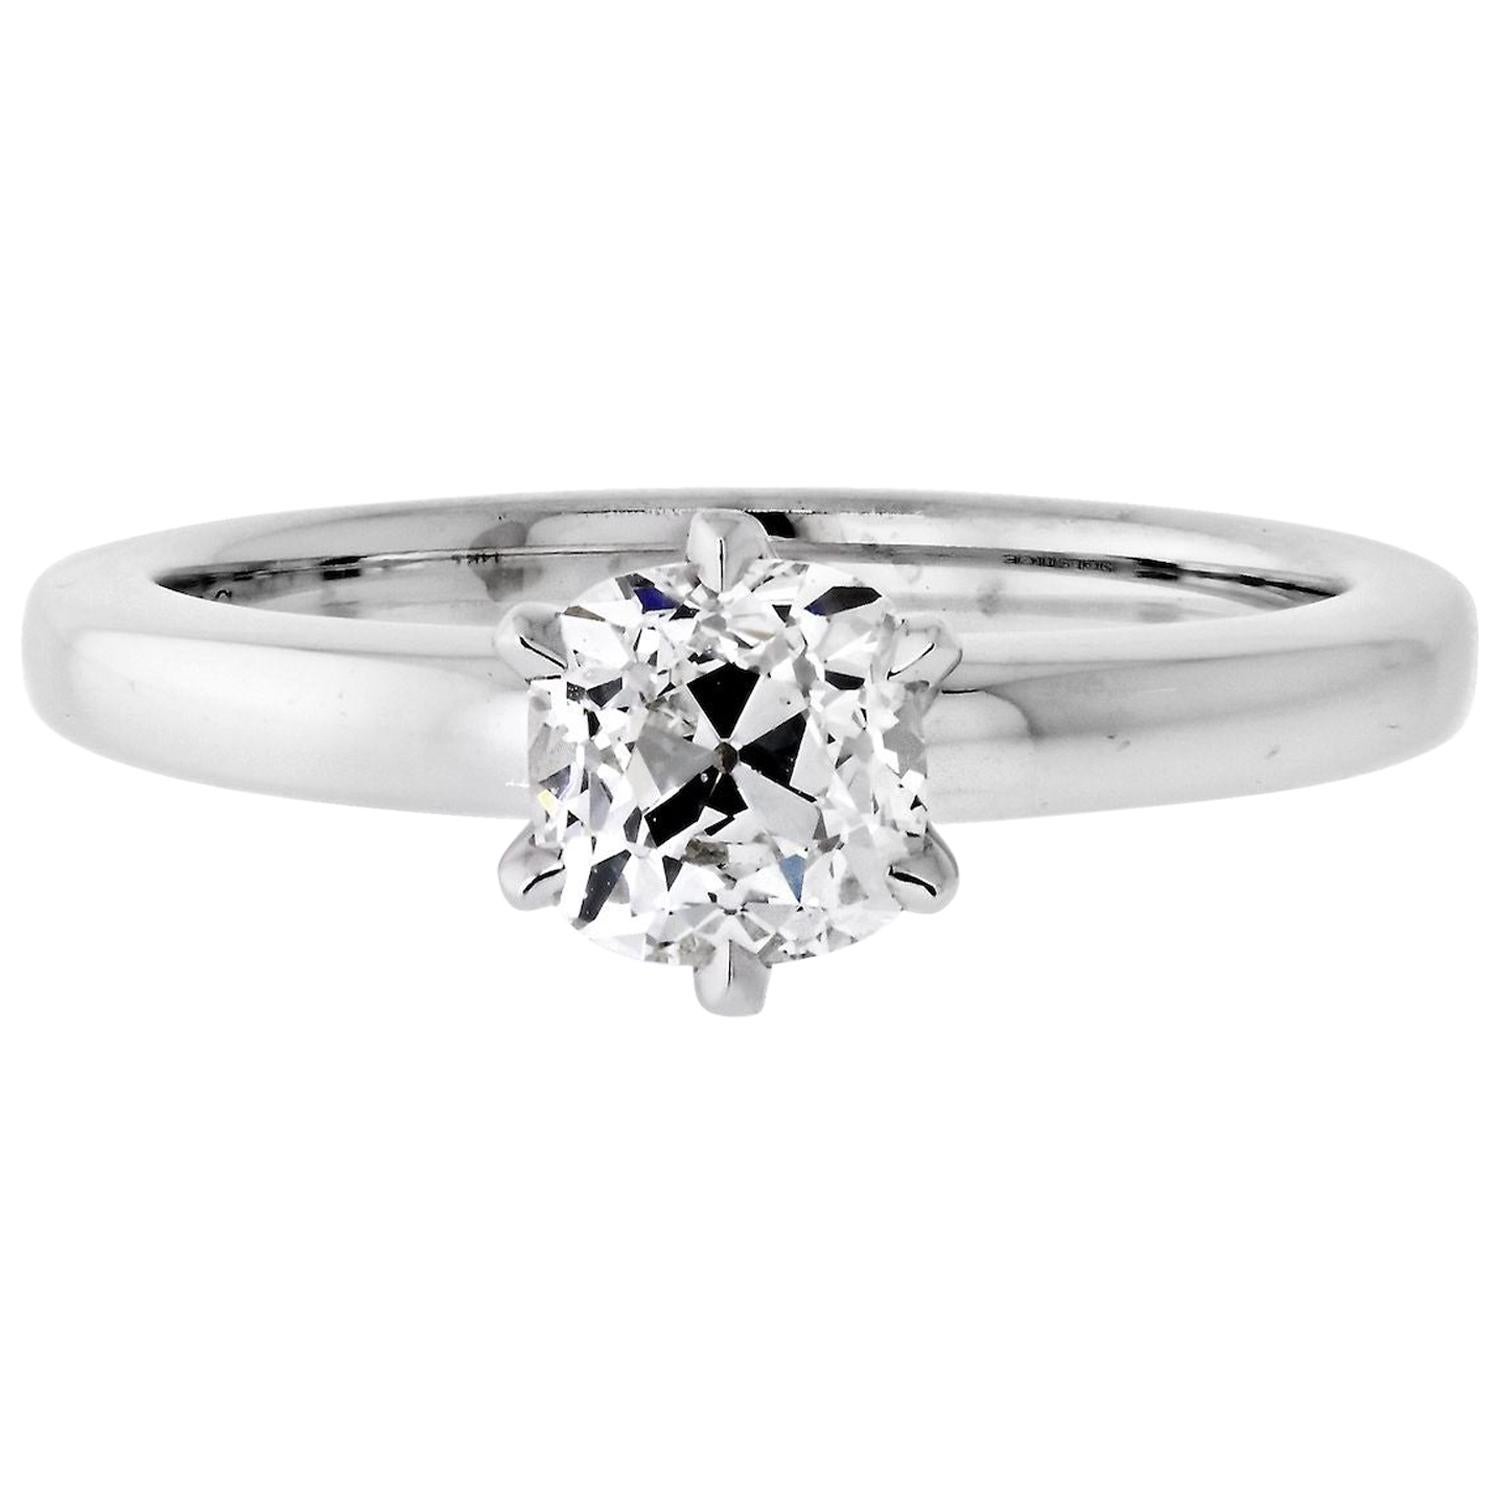 1.06 Carat Old Mine Cut Diamond F/SI1 GIA Solitaire Engagement Ring For Sale